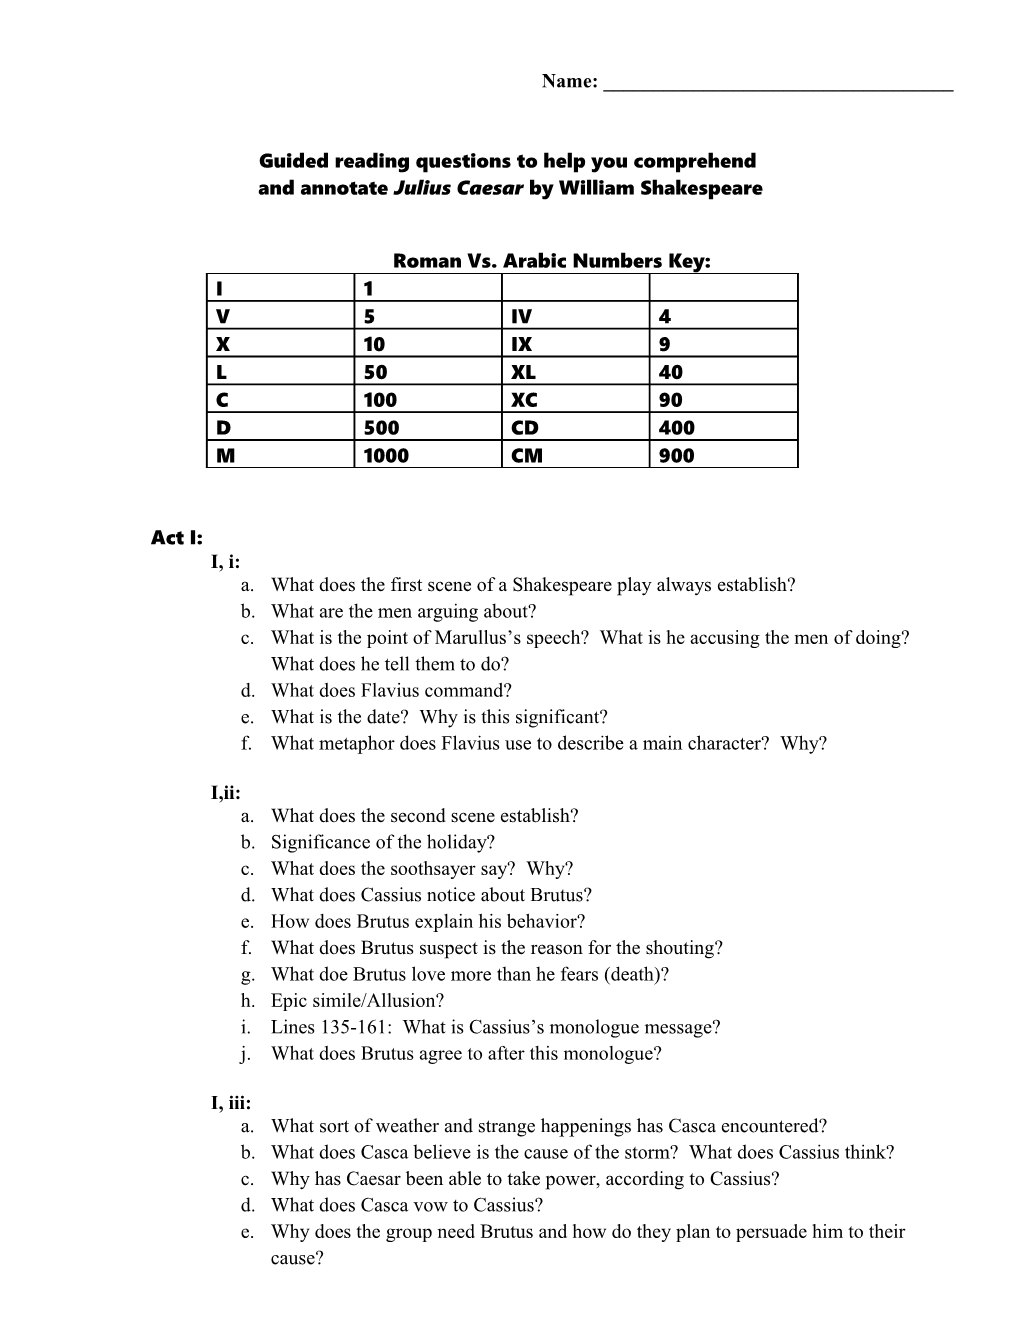 Guided Reading Questions to Help You Comprehend